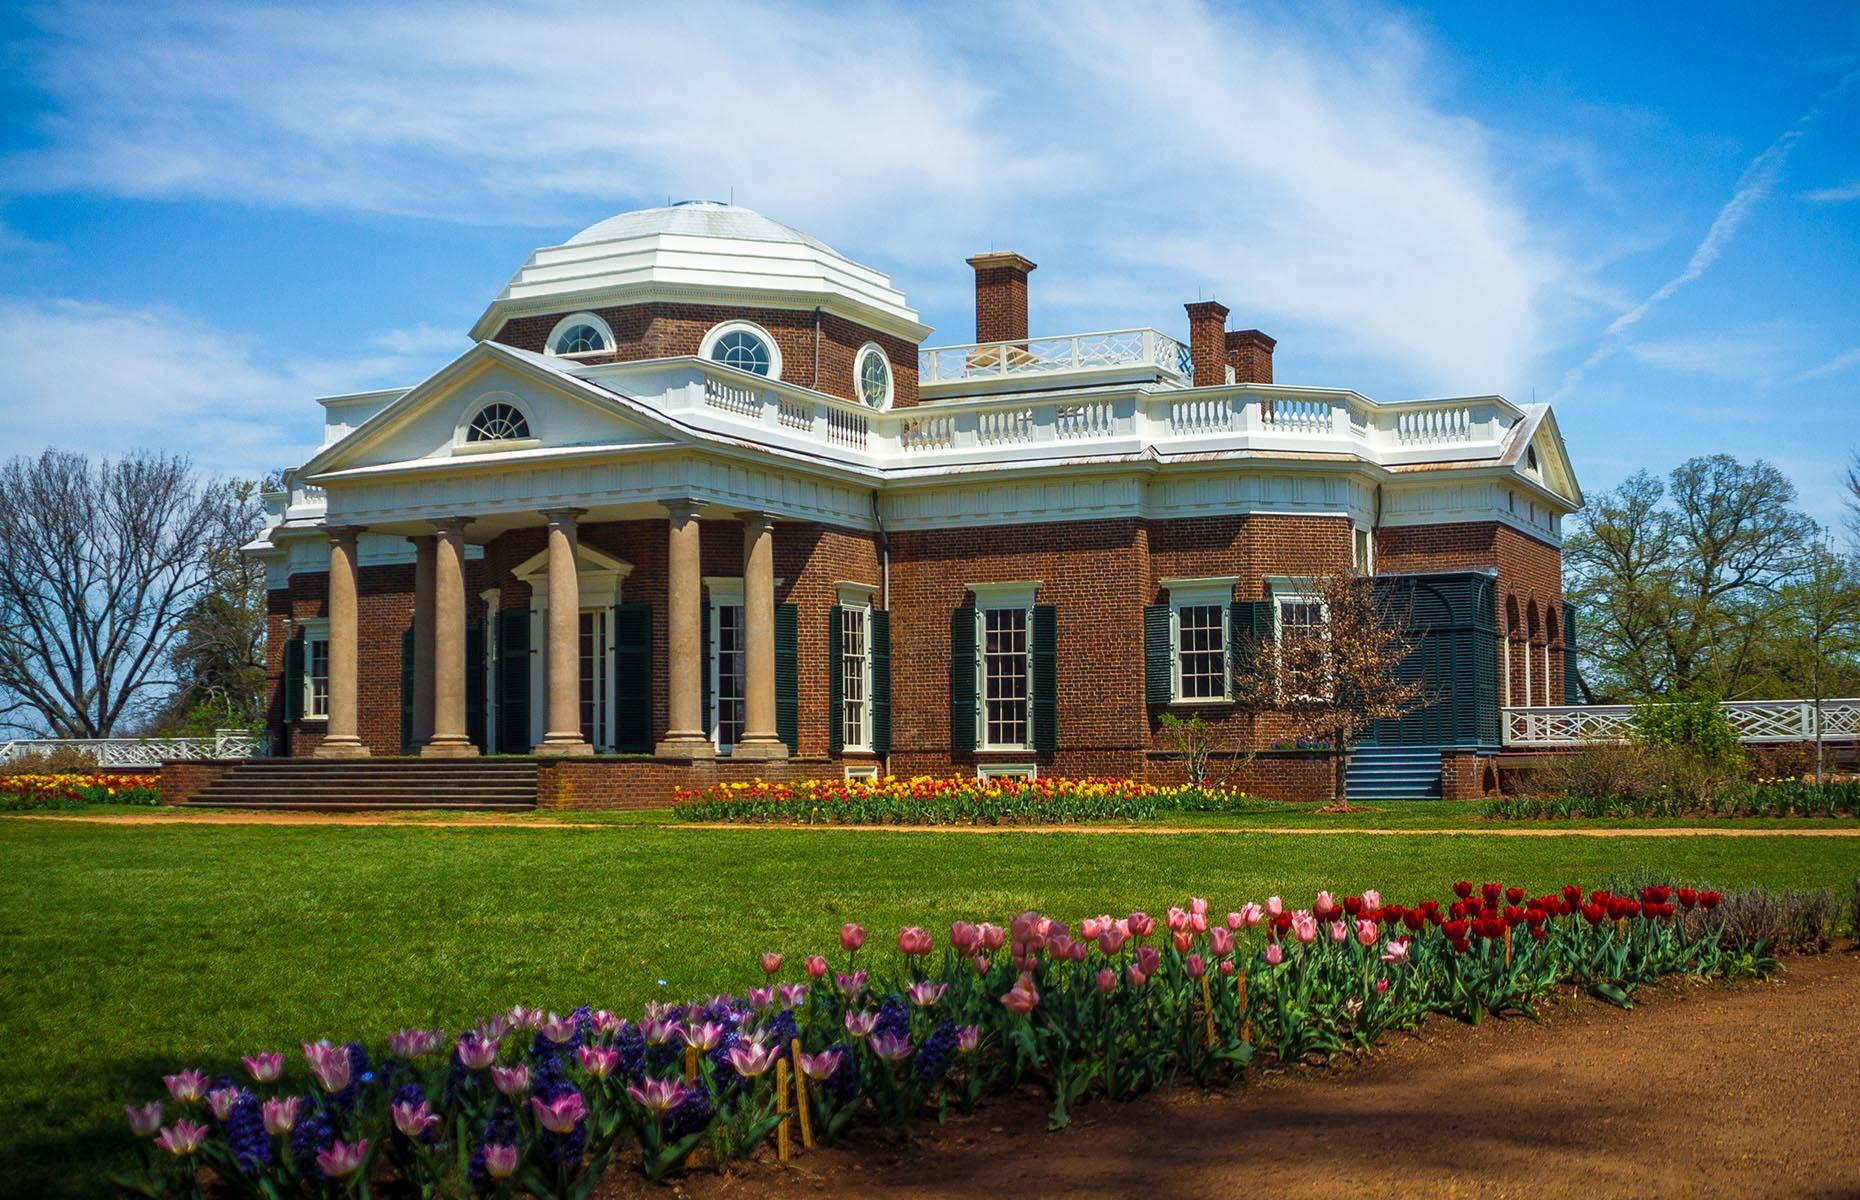 <p>One of America’s most elegant presidential homes, Monticello belonged to the third president of the United States, Thomas Jefferson. Jefferson had a keen interest in architecture and his home was fittingly unique. Although the president was a vocal abolitionist, controversially Monticello was also a plantation and hundreds of enslaved people lived and worked here. Their stories are told through exhibits and on-site tours.</p>